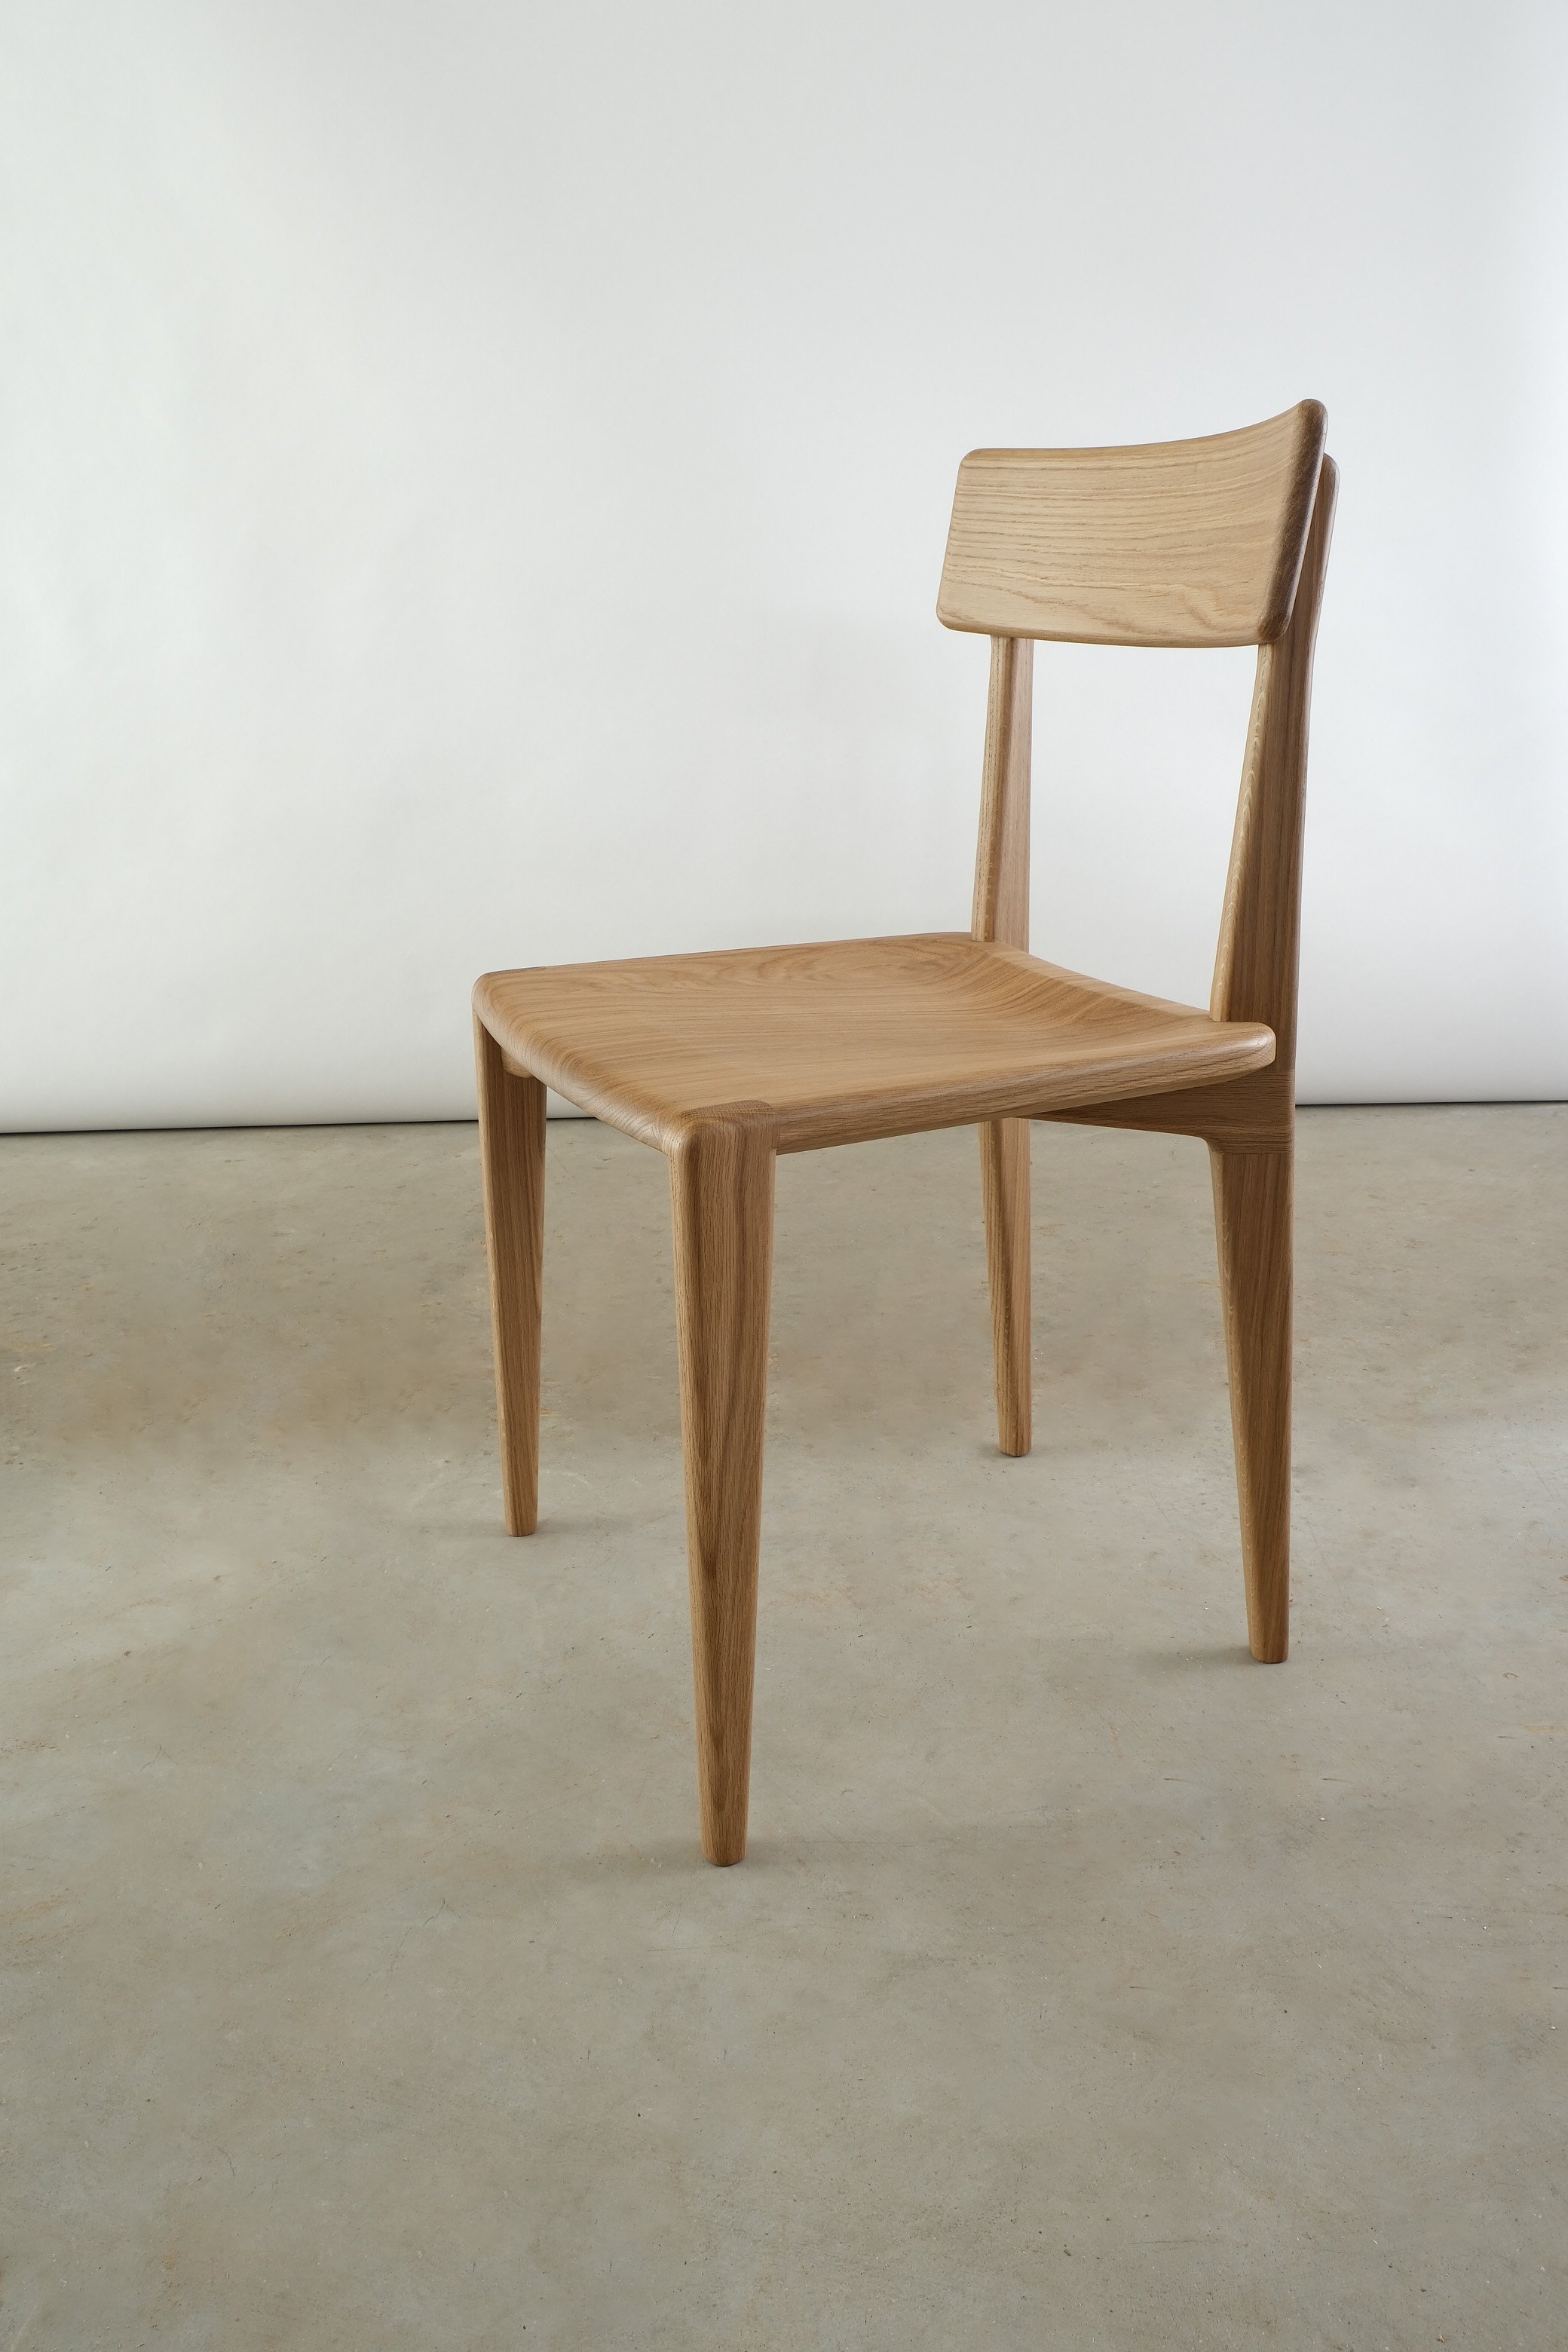 durham chair in oak with white backround 3:4 front view.JPG